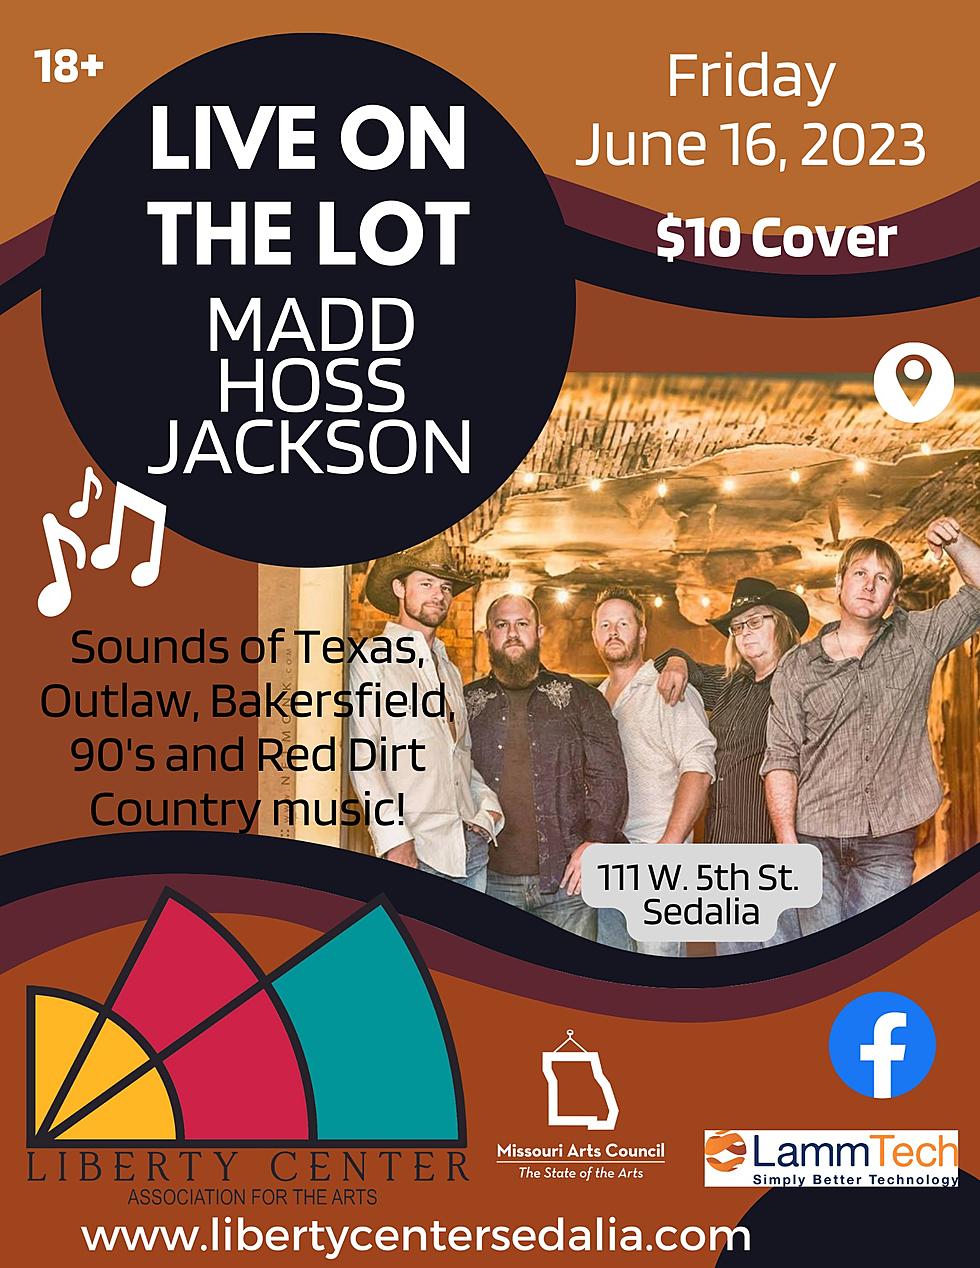 Madd Hoss Jackson Slated for June 16 at ‘The Lot’